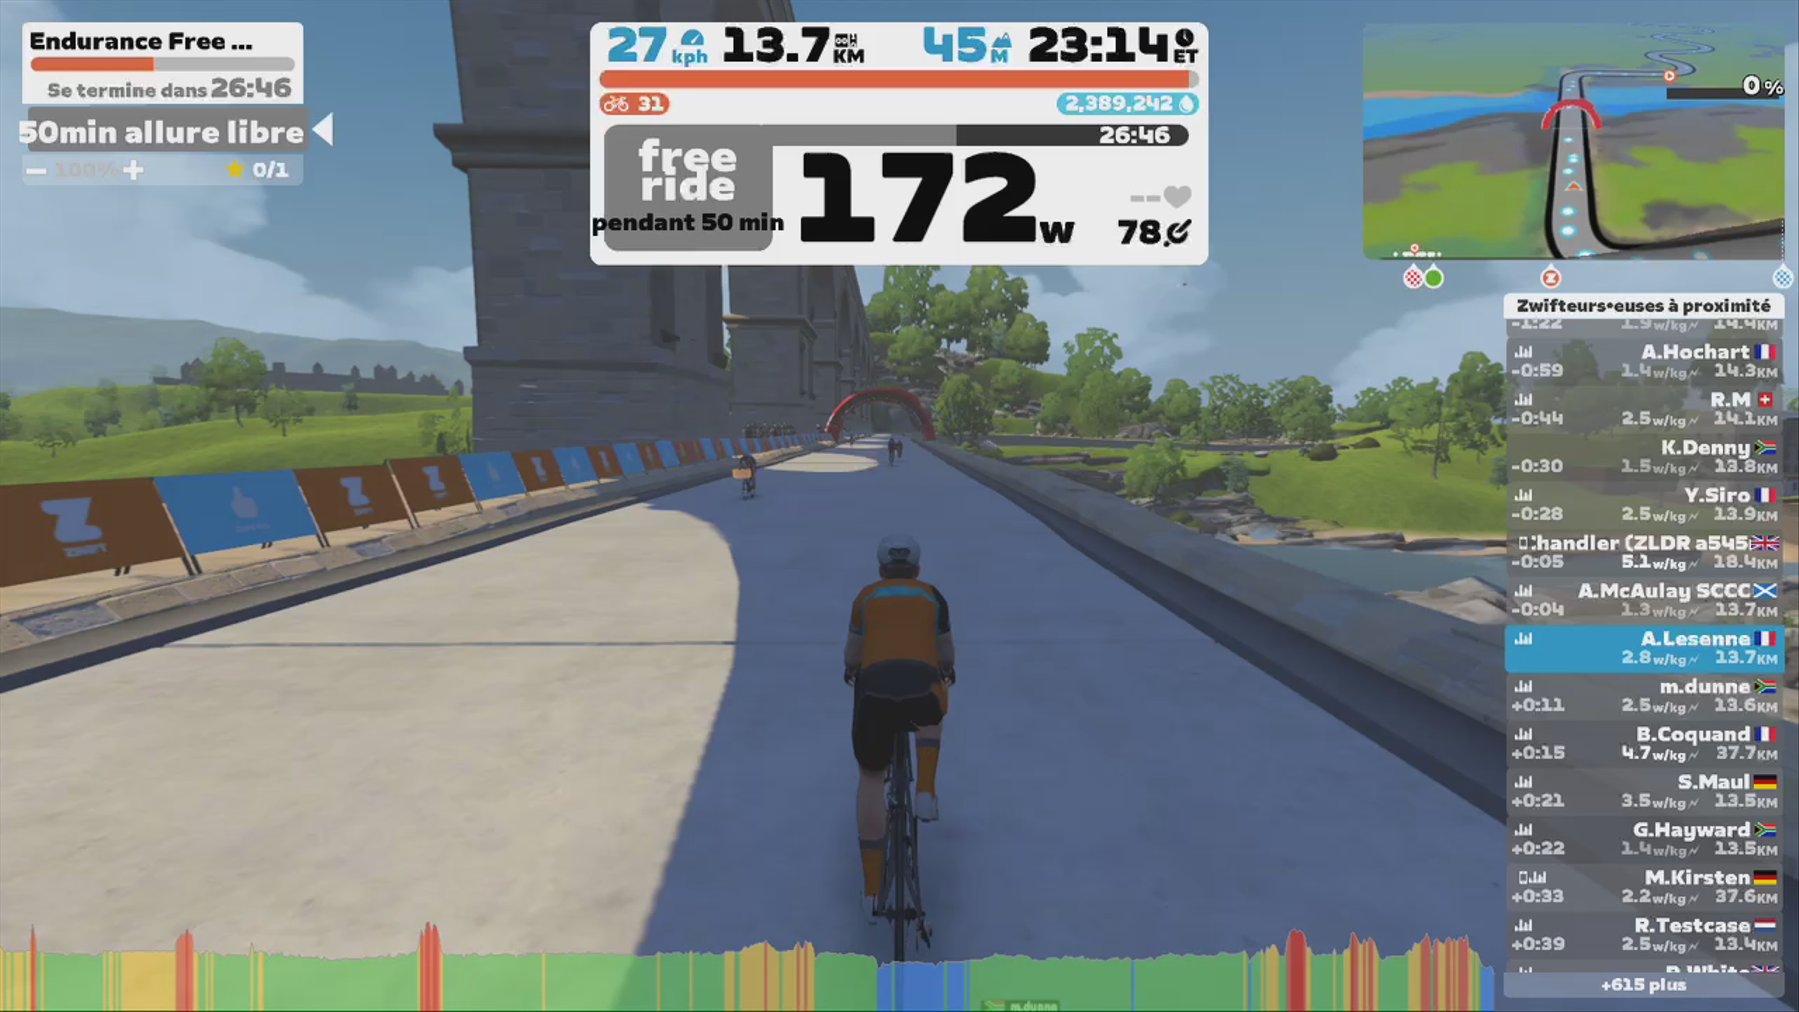 Zwift - Endurance Free Ride in France